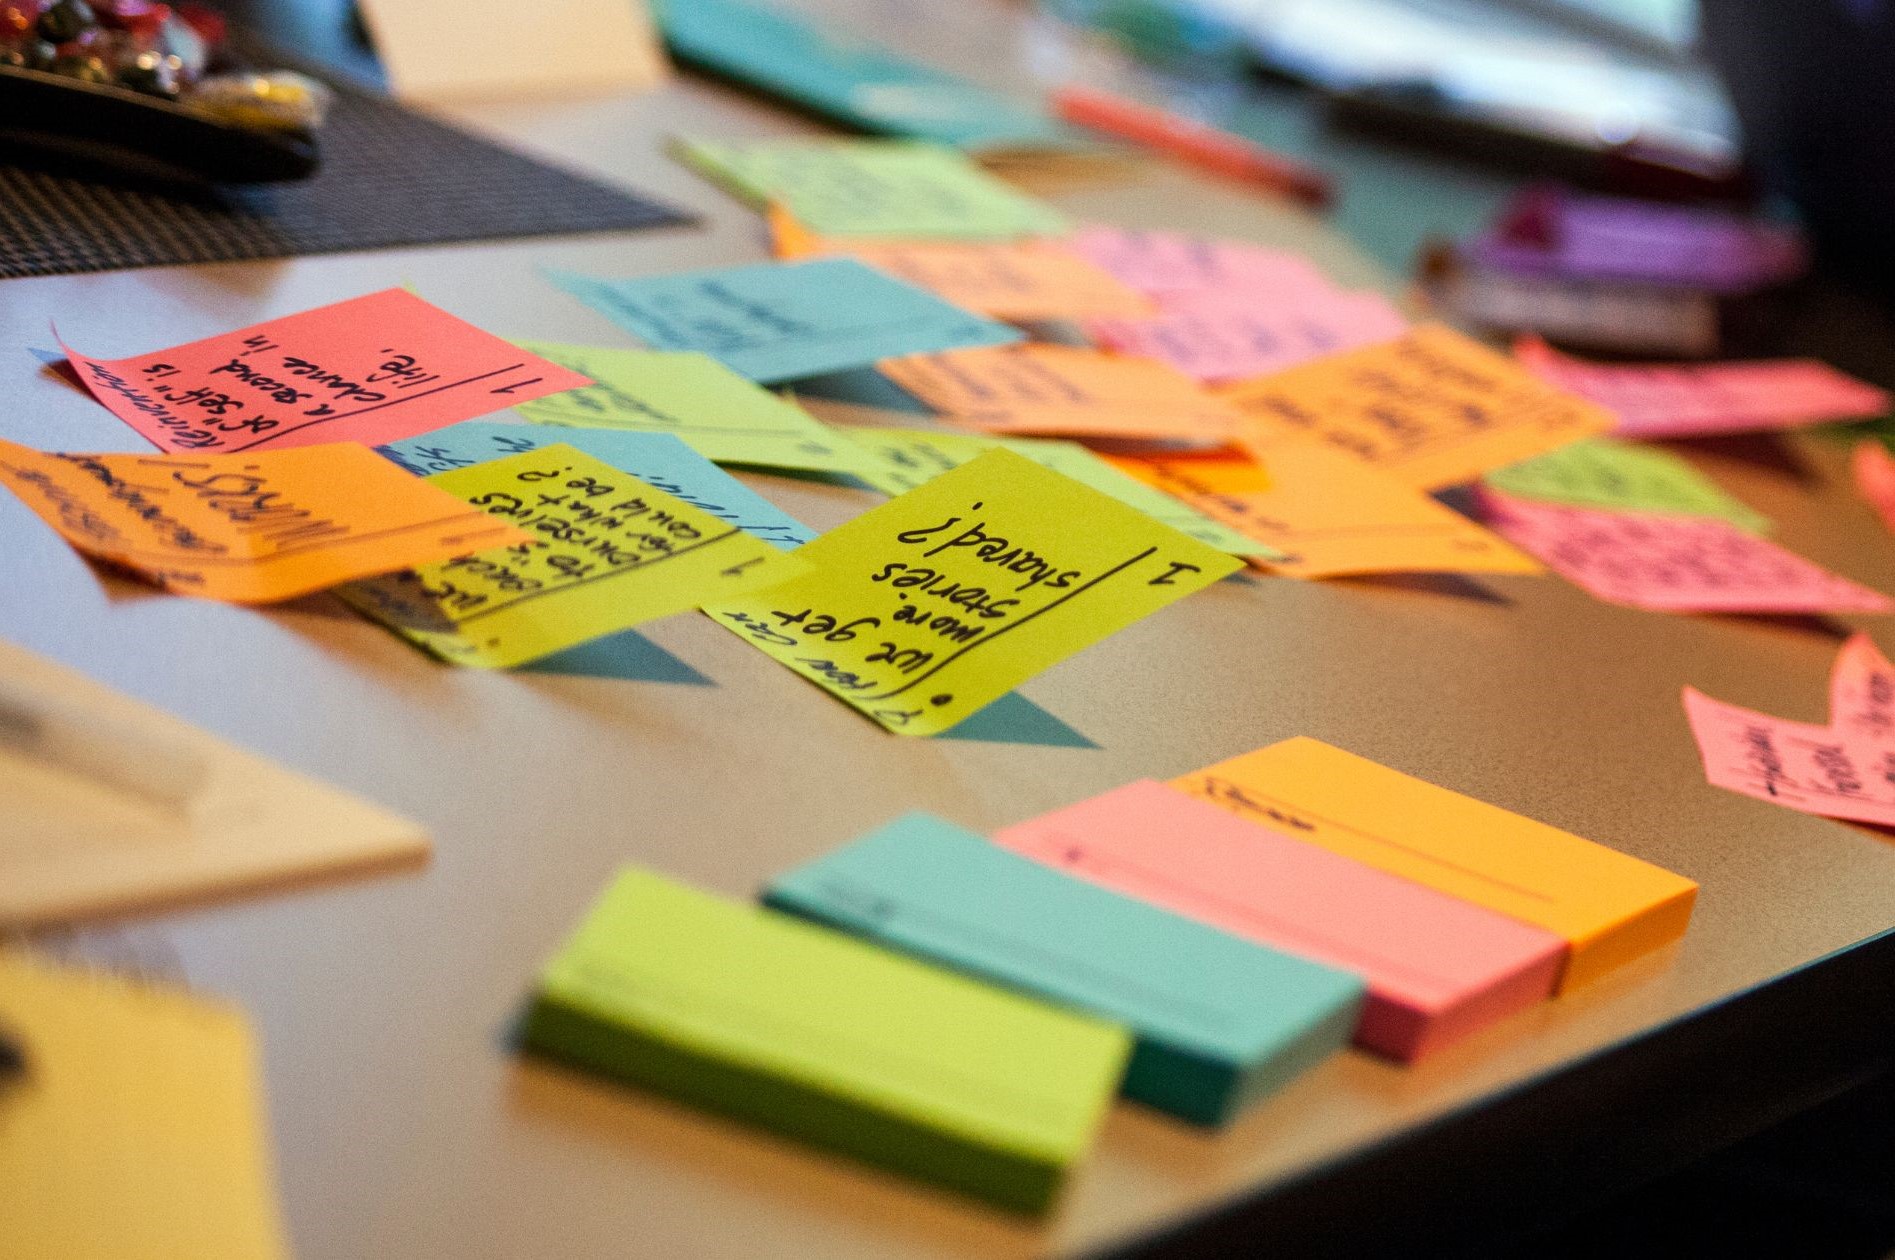 post-it notes scattered on a desk